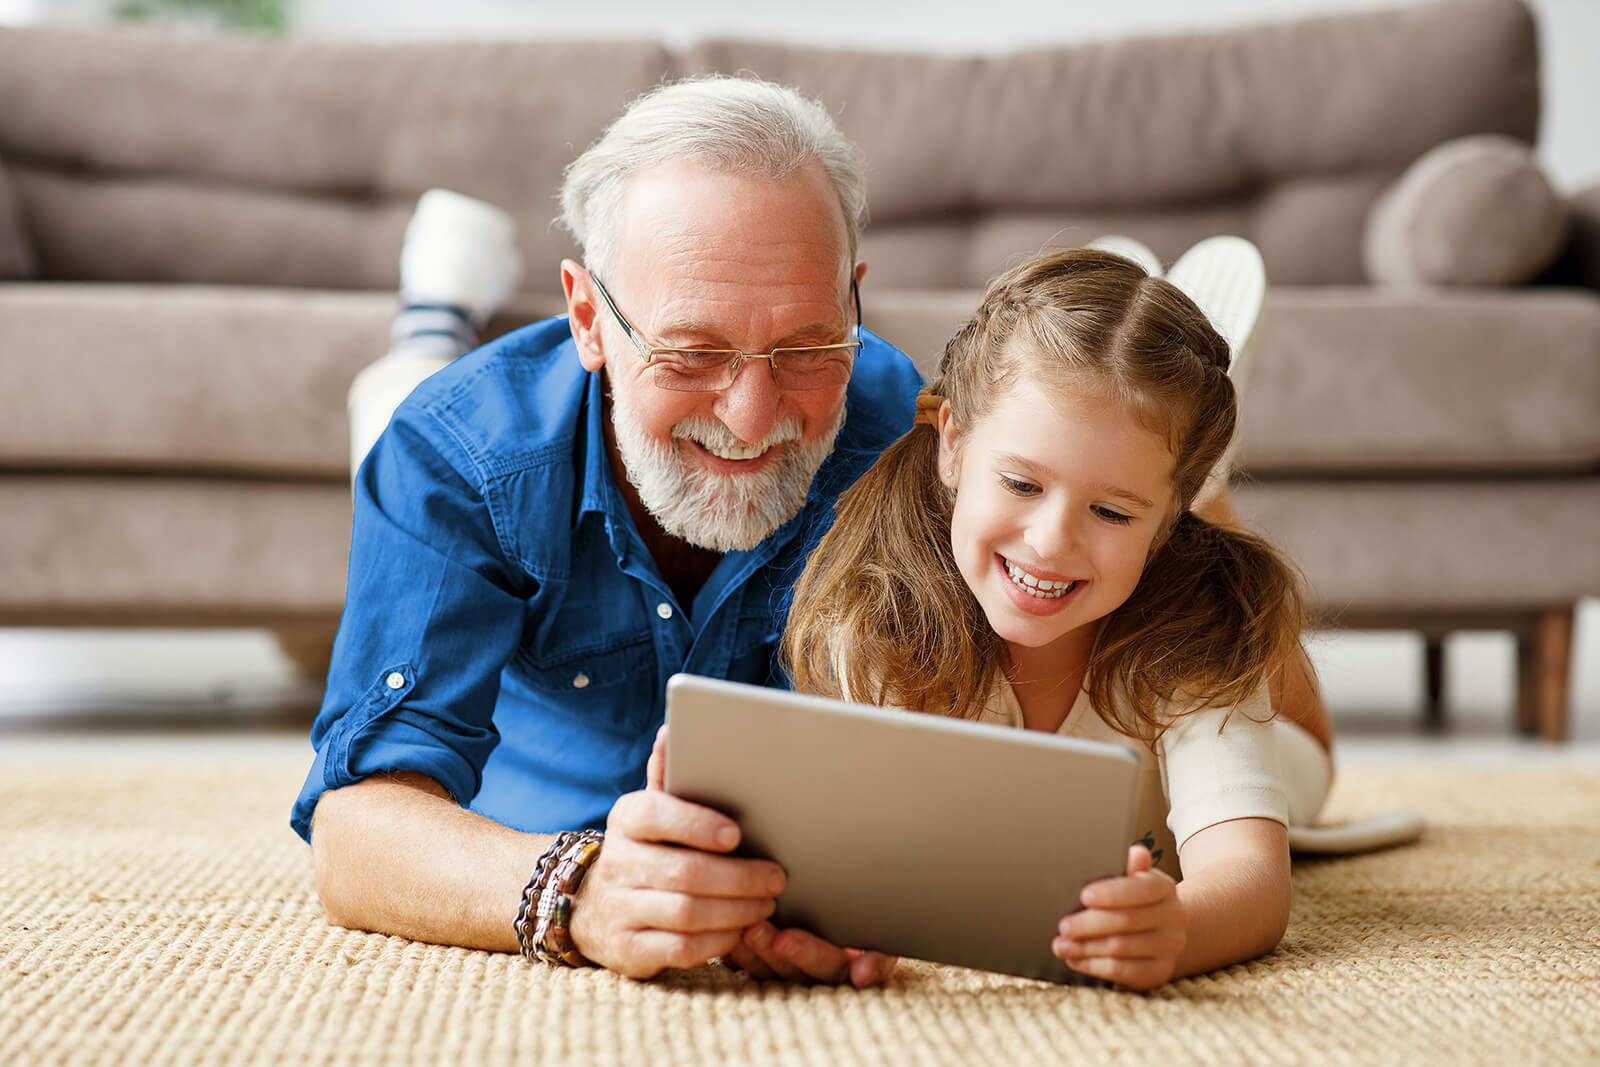 A smiling grandfather and granddaughter lie belly-down on the carpet in front of a sofa, each holding one side of a tablet.